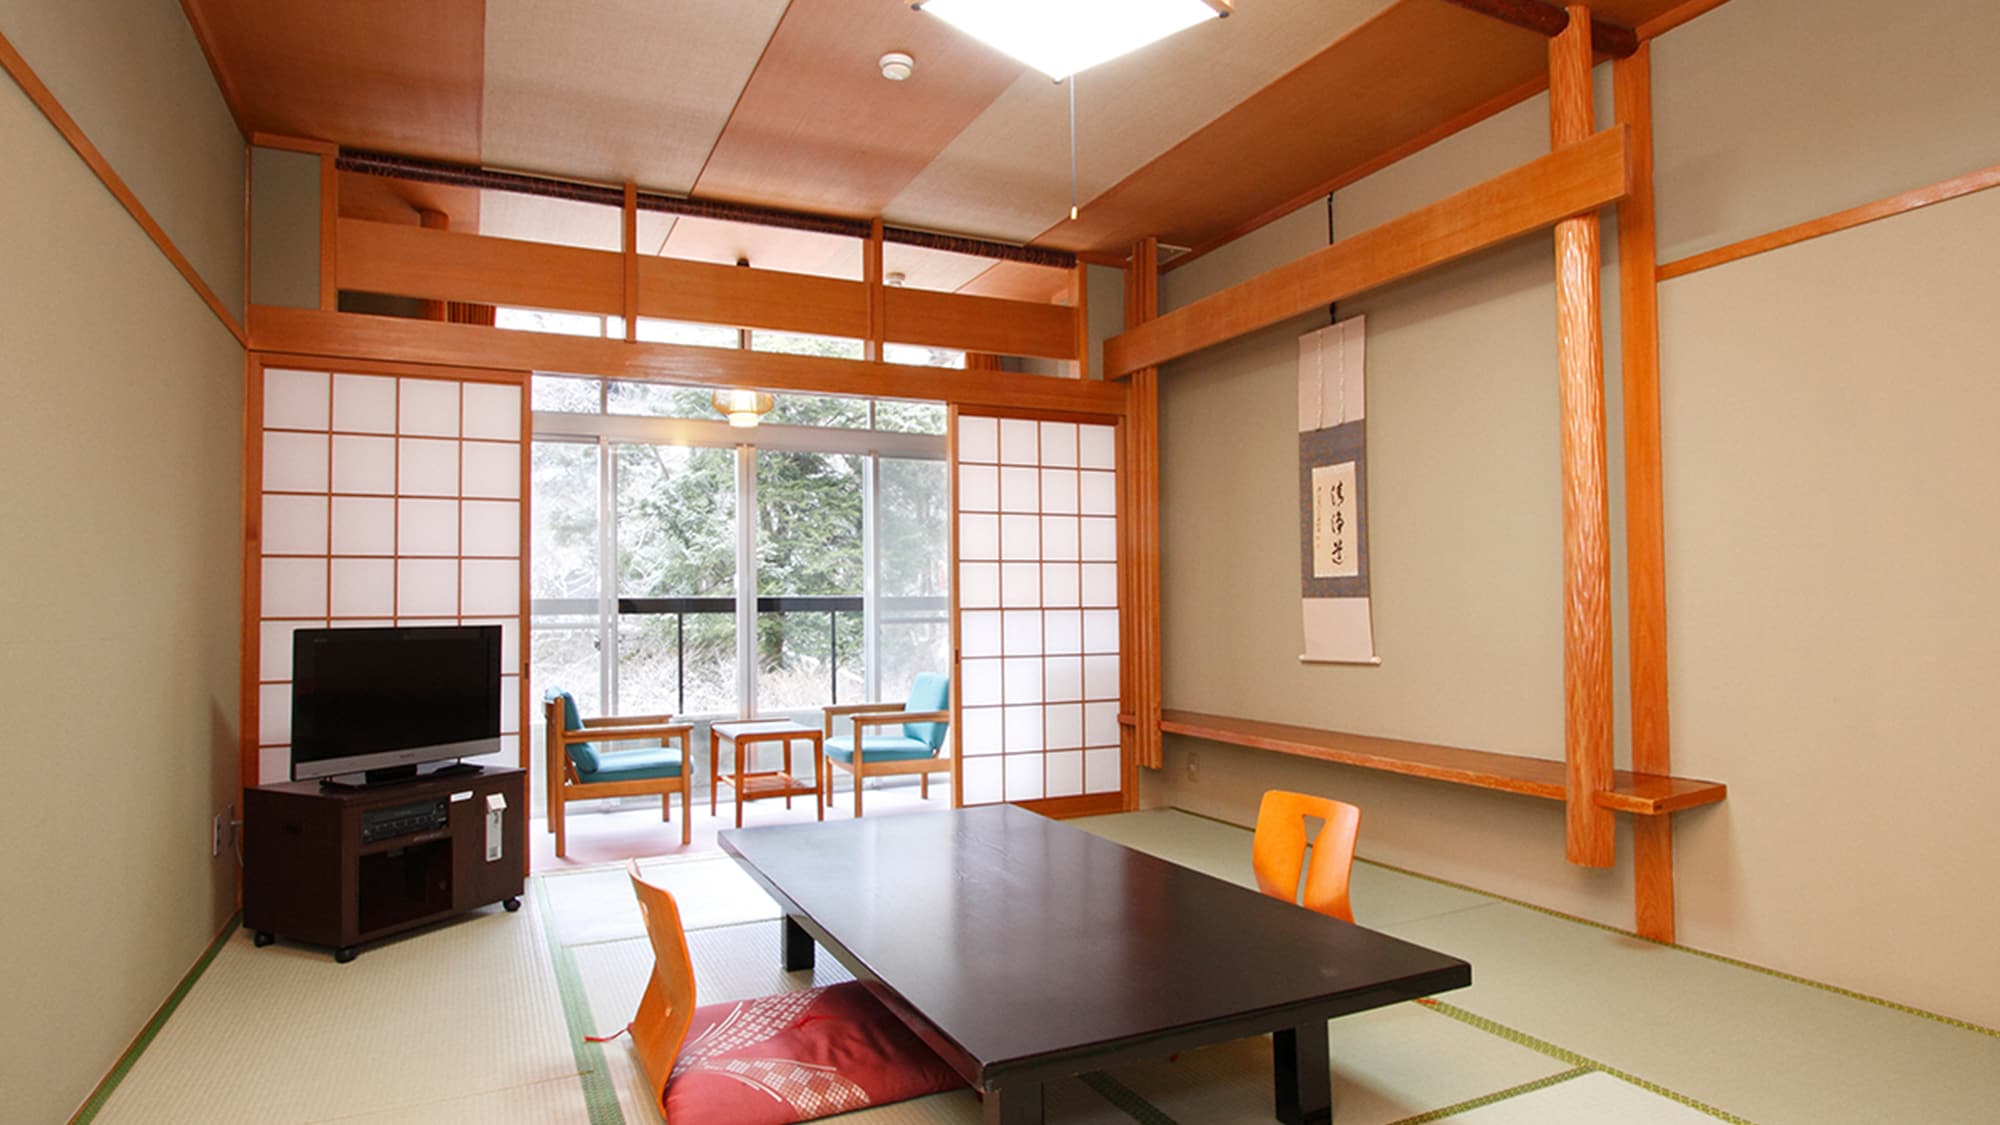 Room example (Japanese-style room in the main building)